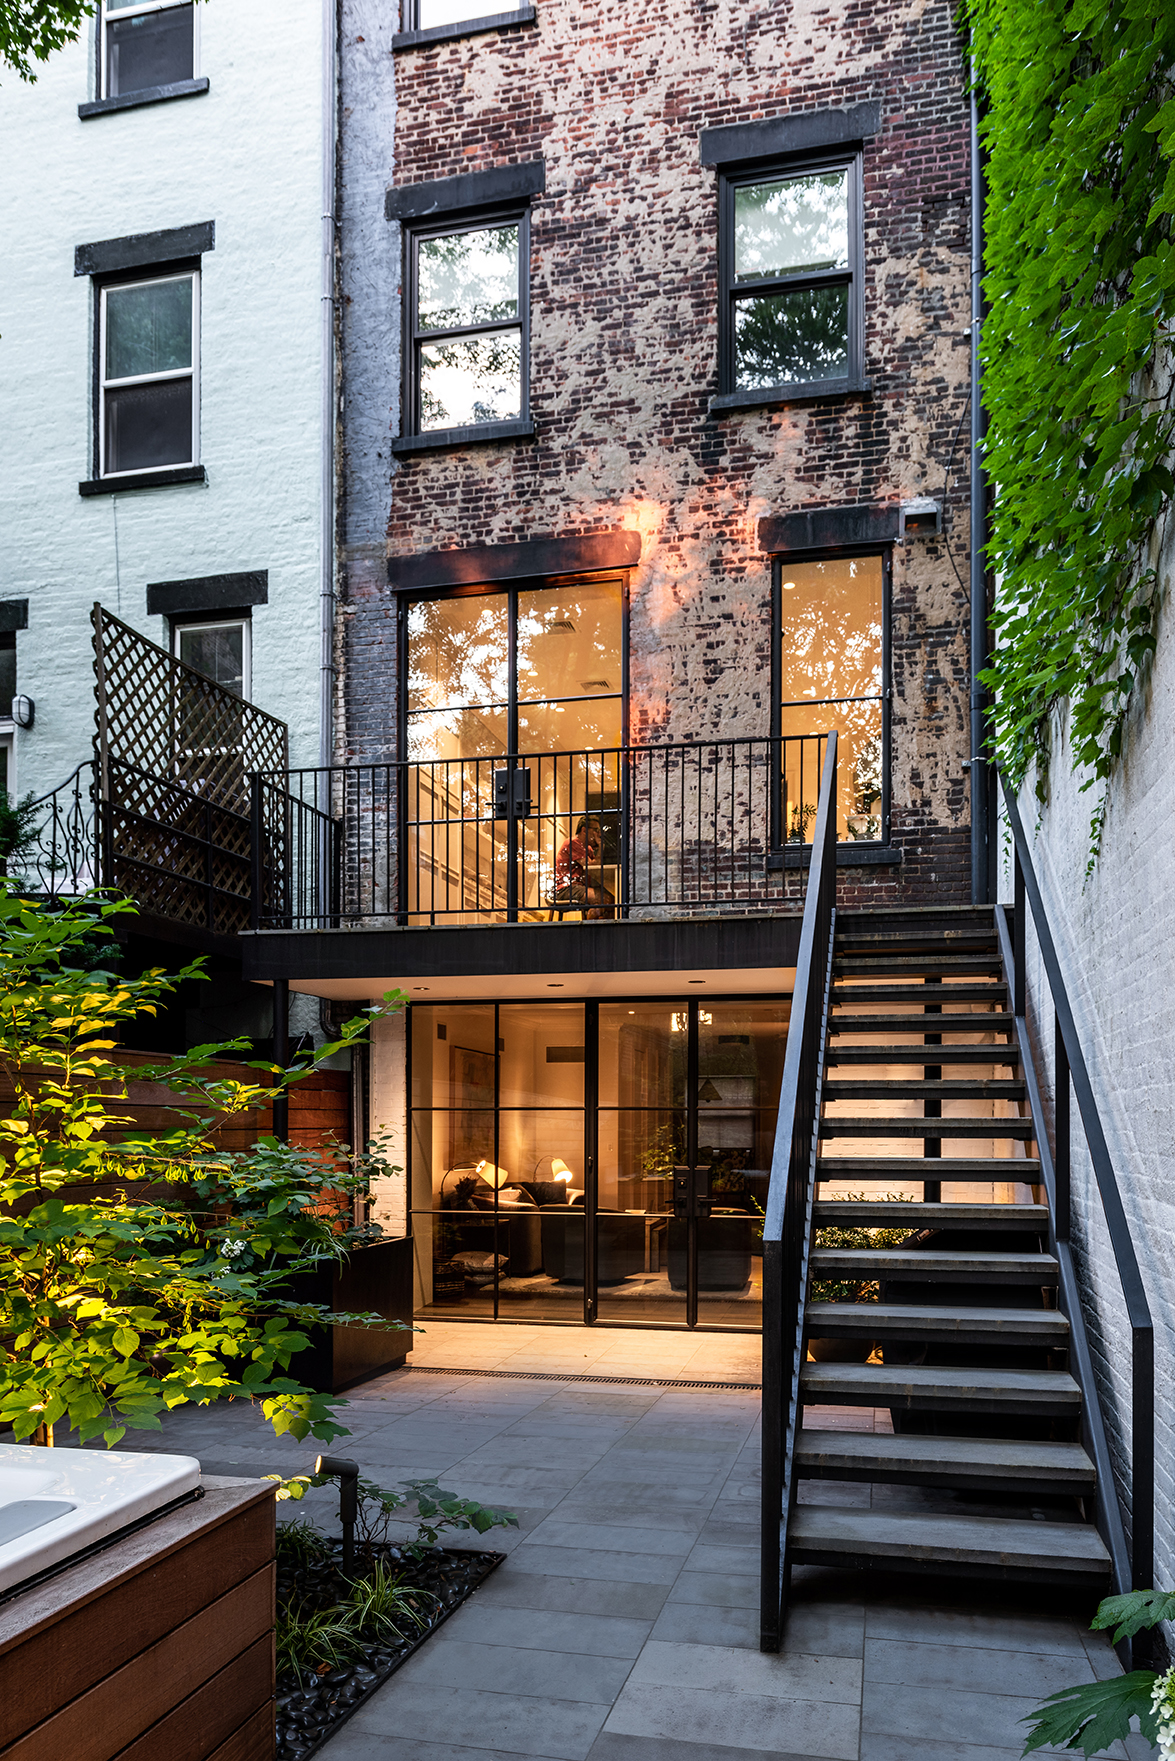 Inside New York's Residential Architecture: Apartments, Brownstones and ...